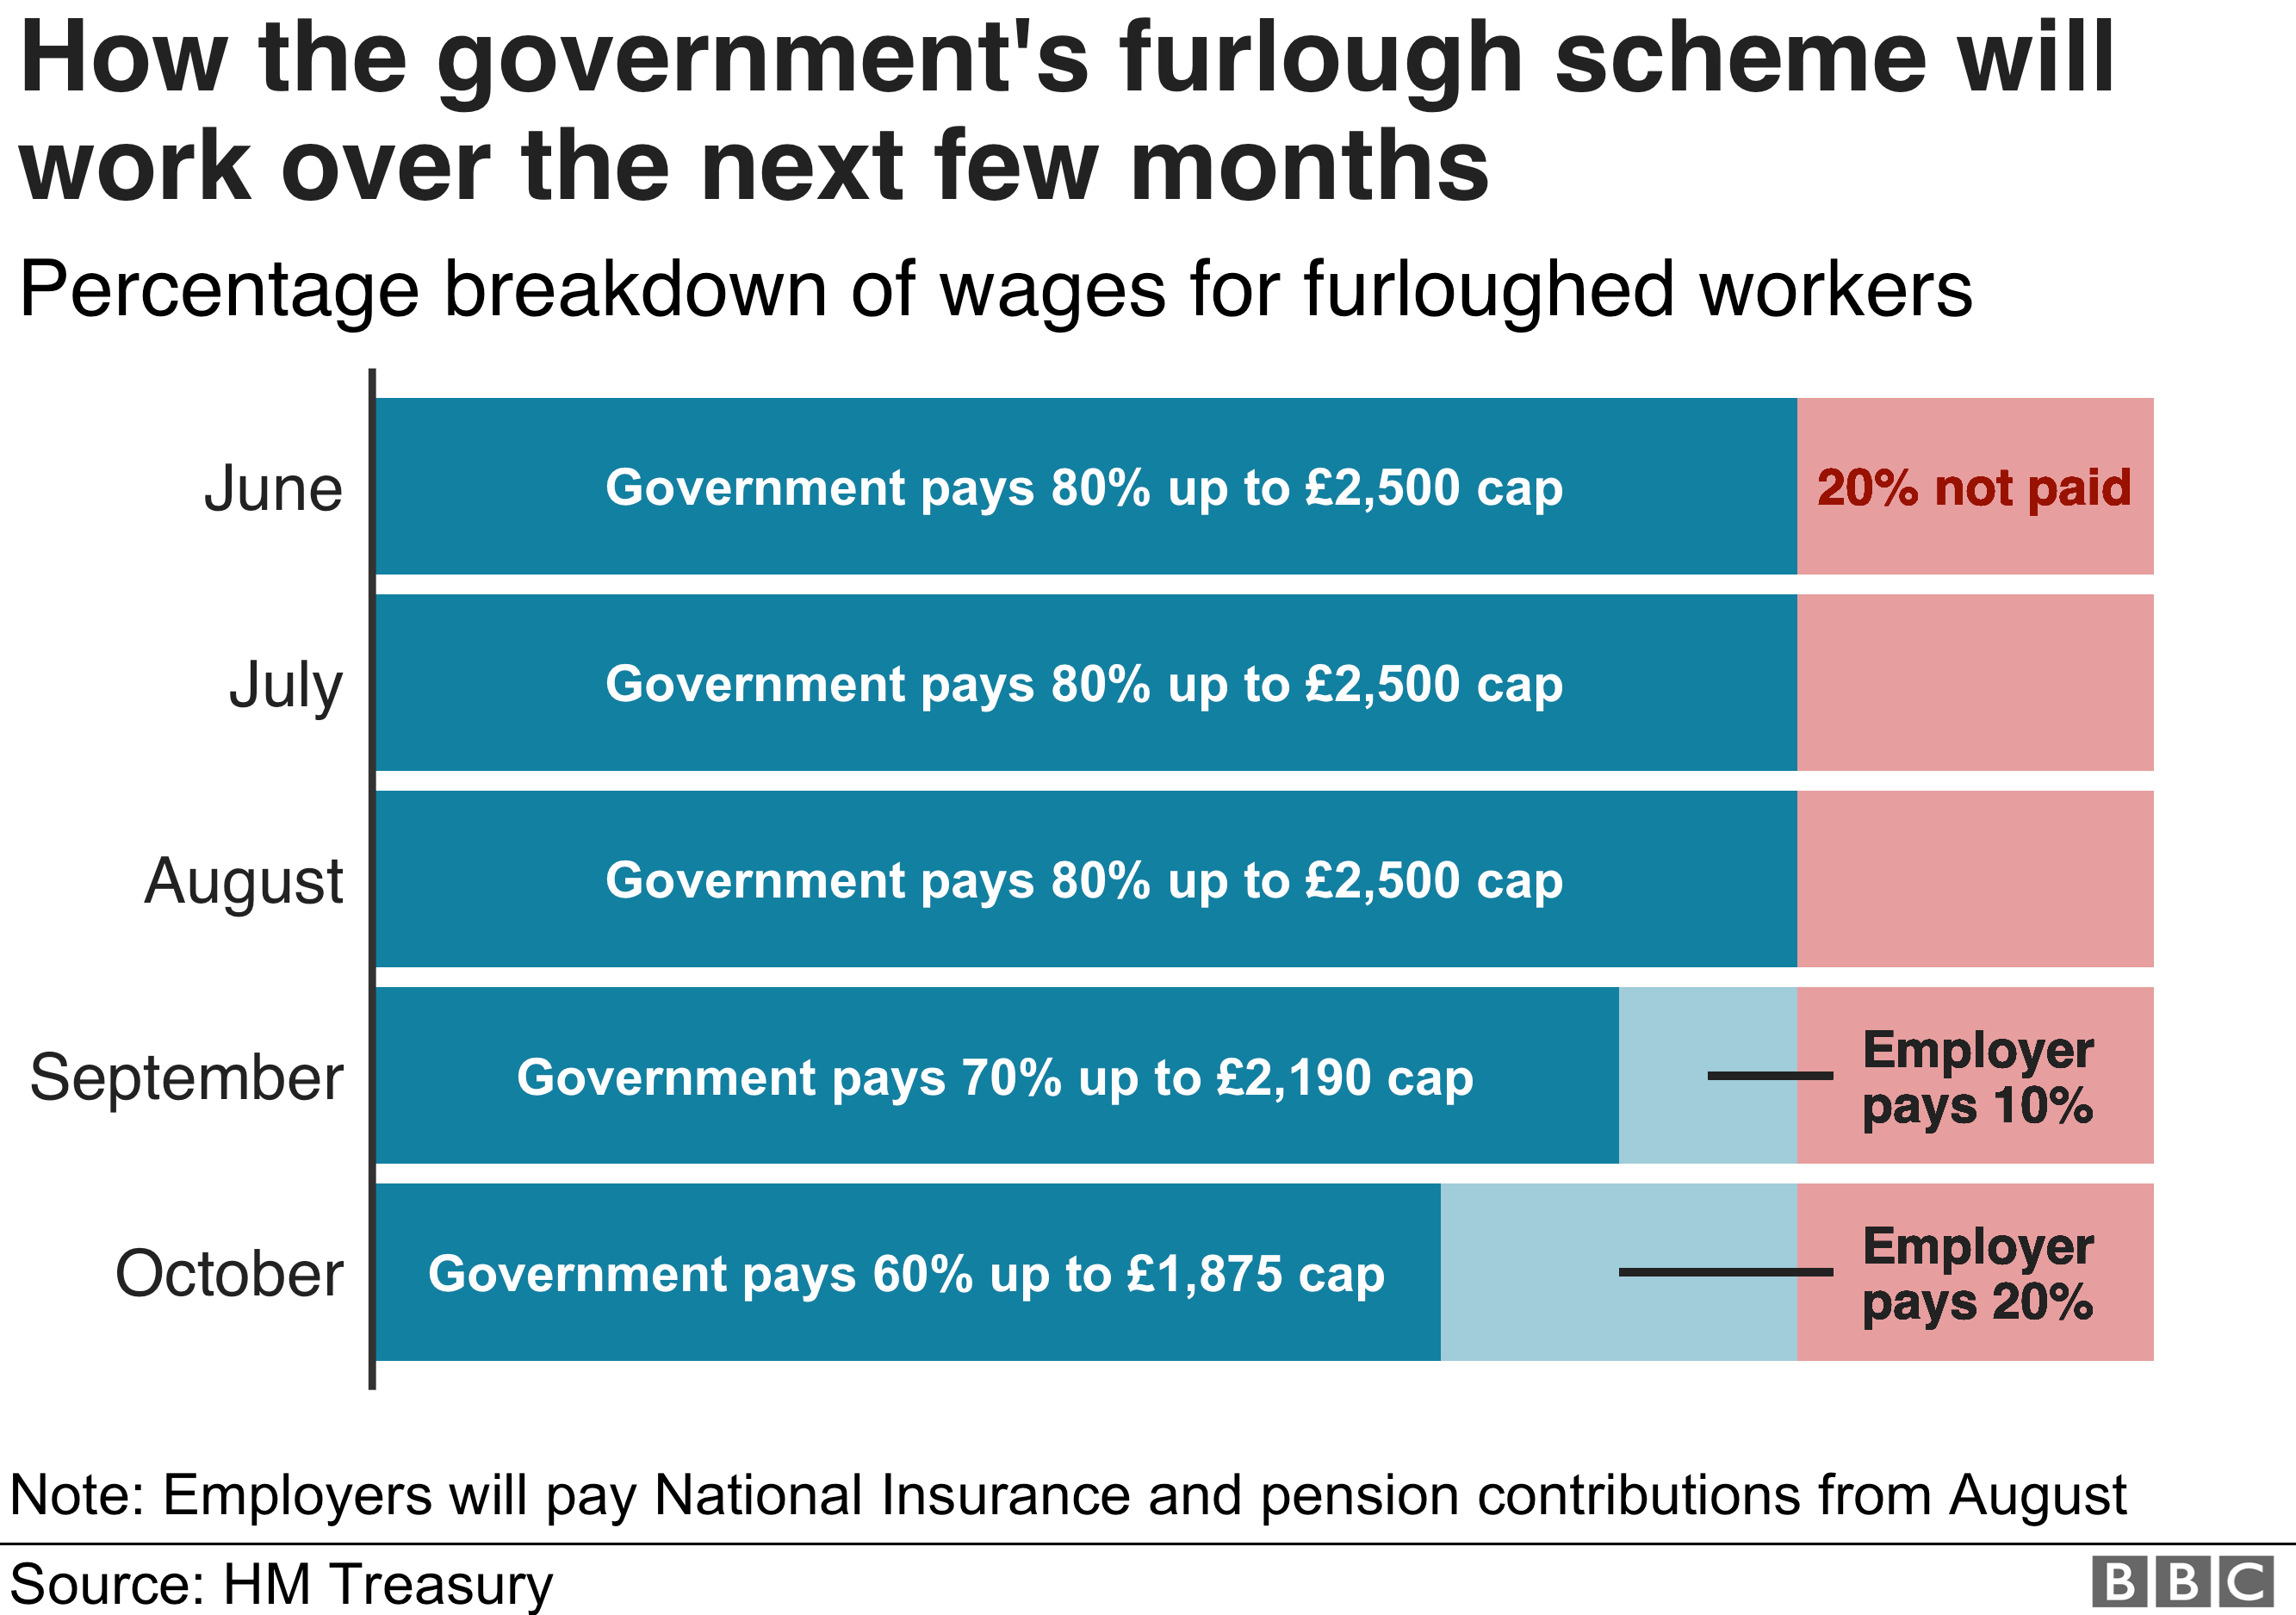 Chart showing how the government's furlough scheme will work over the next few months